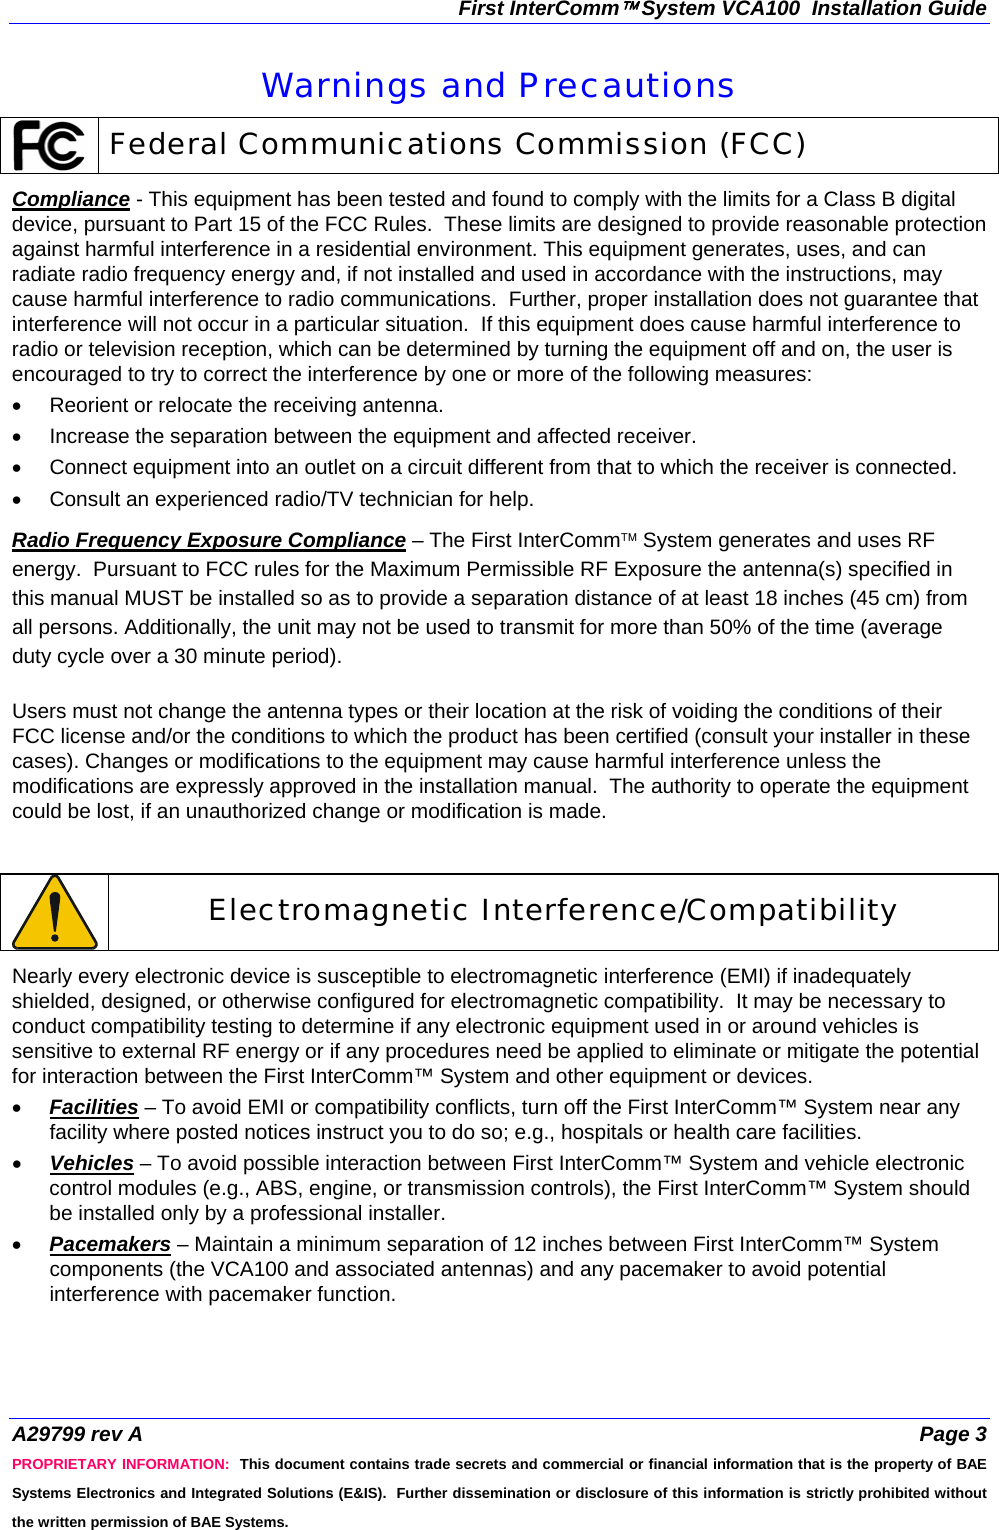 First InterComm™ System VCA100  Installation Guide A29799 rev A  Page 3 PROPRIETARY INFORMATION:  This document contains trade secrets and commercial or financial information that is the property of BAE Systems Electronics and Integrated Solutions (E&amp;IS).  Further dissemination or disclosure of this information is strictly prohibited without the written permission of BAE Systems. Warnings and Precautions  Federal Communications Commission (FCC) Compliance - This equipment has been tested and found to comply with the limits for a Class B digital device, pursuant to Part 15 of the FCC Rules.  These limits are designed to provide reasonable protection against harmful interference in a residential environment. This equipment generates, uses, and can radiate radio frequency energy and, if not installed and used in accordance with the instructions, may cause harmful interference to radio communications.  Further, proper installation does not guarantee that interference will not occur in a particular situation.  If this equipment does cause harmful interference to radio or television reception, which can be determined by turning the equipment off and on, the user is encouraged to try to correct the interference by one or more of the following measures: •  Reorient or relocate the receiving antenna. •  Increase the separation between the equipment and affected receiver. •  Connect equipment into an outlet on a circuit different from that to which the receiver is connected. •  Consult an experienced radio/TV technician for help. Radio Frequency Exposure Compliance – The First InterComm™ System generates and uses RF energy.  Pursuant to FCC rules for the Maximum Permissible RF Exposure the antenna(s) specified in this manual MUST be installed so as to provide a separation distance of at least 18 inches (45 cm) from all persons. Additionally, the unit may not be used to transmit for more than 50% of the time (average duty cycle over a 30 minute period).  Users must not change the antenna types or their location at the risk of voiding the conditions of their FCC license and/or the conditions to which the product has been certified (consult your installer in these cases). Changes or modifications to the equipment may cause harmful interference unless the modifications are expressly approved in the installation manual.  The authority to operate the equipment could be lost, if an unauthorized change or modification is made.     Electromagnetic Interference/Compatibility Nearly every electronic device is susceptible to electromagnetic interference (EMI) if inadequately shielded, designed, or otherwise configured for electromagnetic compatibility.  It may be necessary to conduct compatibility testing to determine if any electronic equipment used in or around vehicles is sensitive to external RF energy or if any procedures need be applied to eliminate or mitigate the potential for interaction between the First InterComm™ System and other equipment or devices. • Facilities – To avoid EMI or compatibility conflicts, turn off the First InterComm™ System near any facility where posted notices instruct you to do so; e.g., hospitals or health care facilities.  • Vehicles – To avoid possible interaction between First InterComm™ System and vehicle electronic control modules (e.g., ABS, engine, or transmission controls), the First InterComm™ System should be installed only by a professional installer. • Pacemakers – Maintain a minimum separation of 12 inches between First InterComm™ System components (the VCA100 and associated antennas) and any pacemaker to avoid potential interference with pacemaker function.   